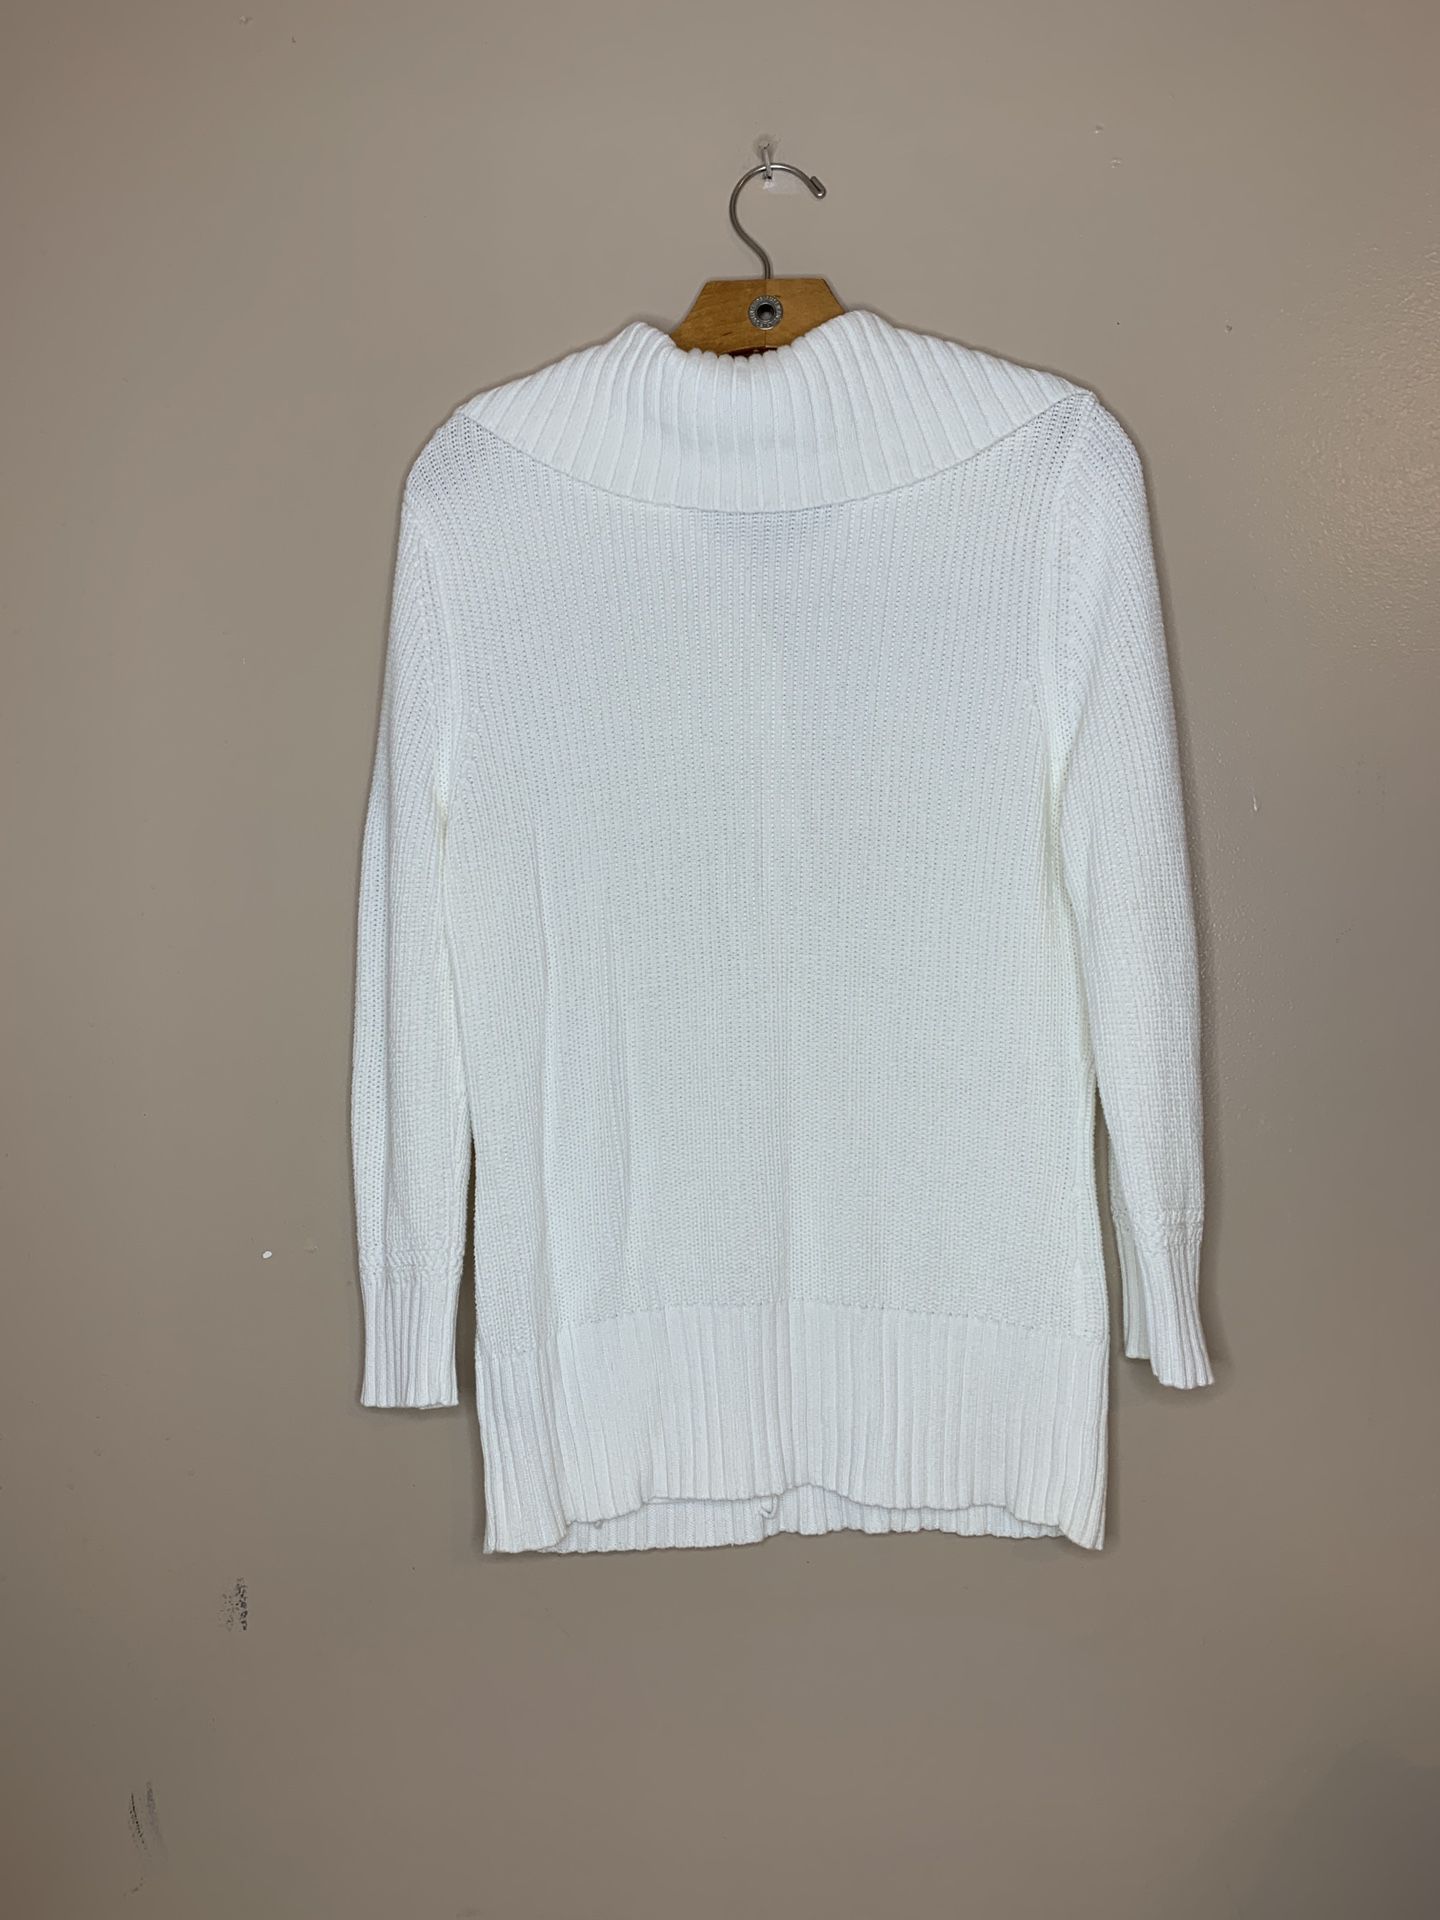 Ralph Lauren Jeans Co Womens White Pullover 1/4 Button LS Sweater Size L Pre-owned